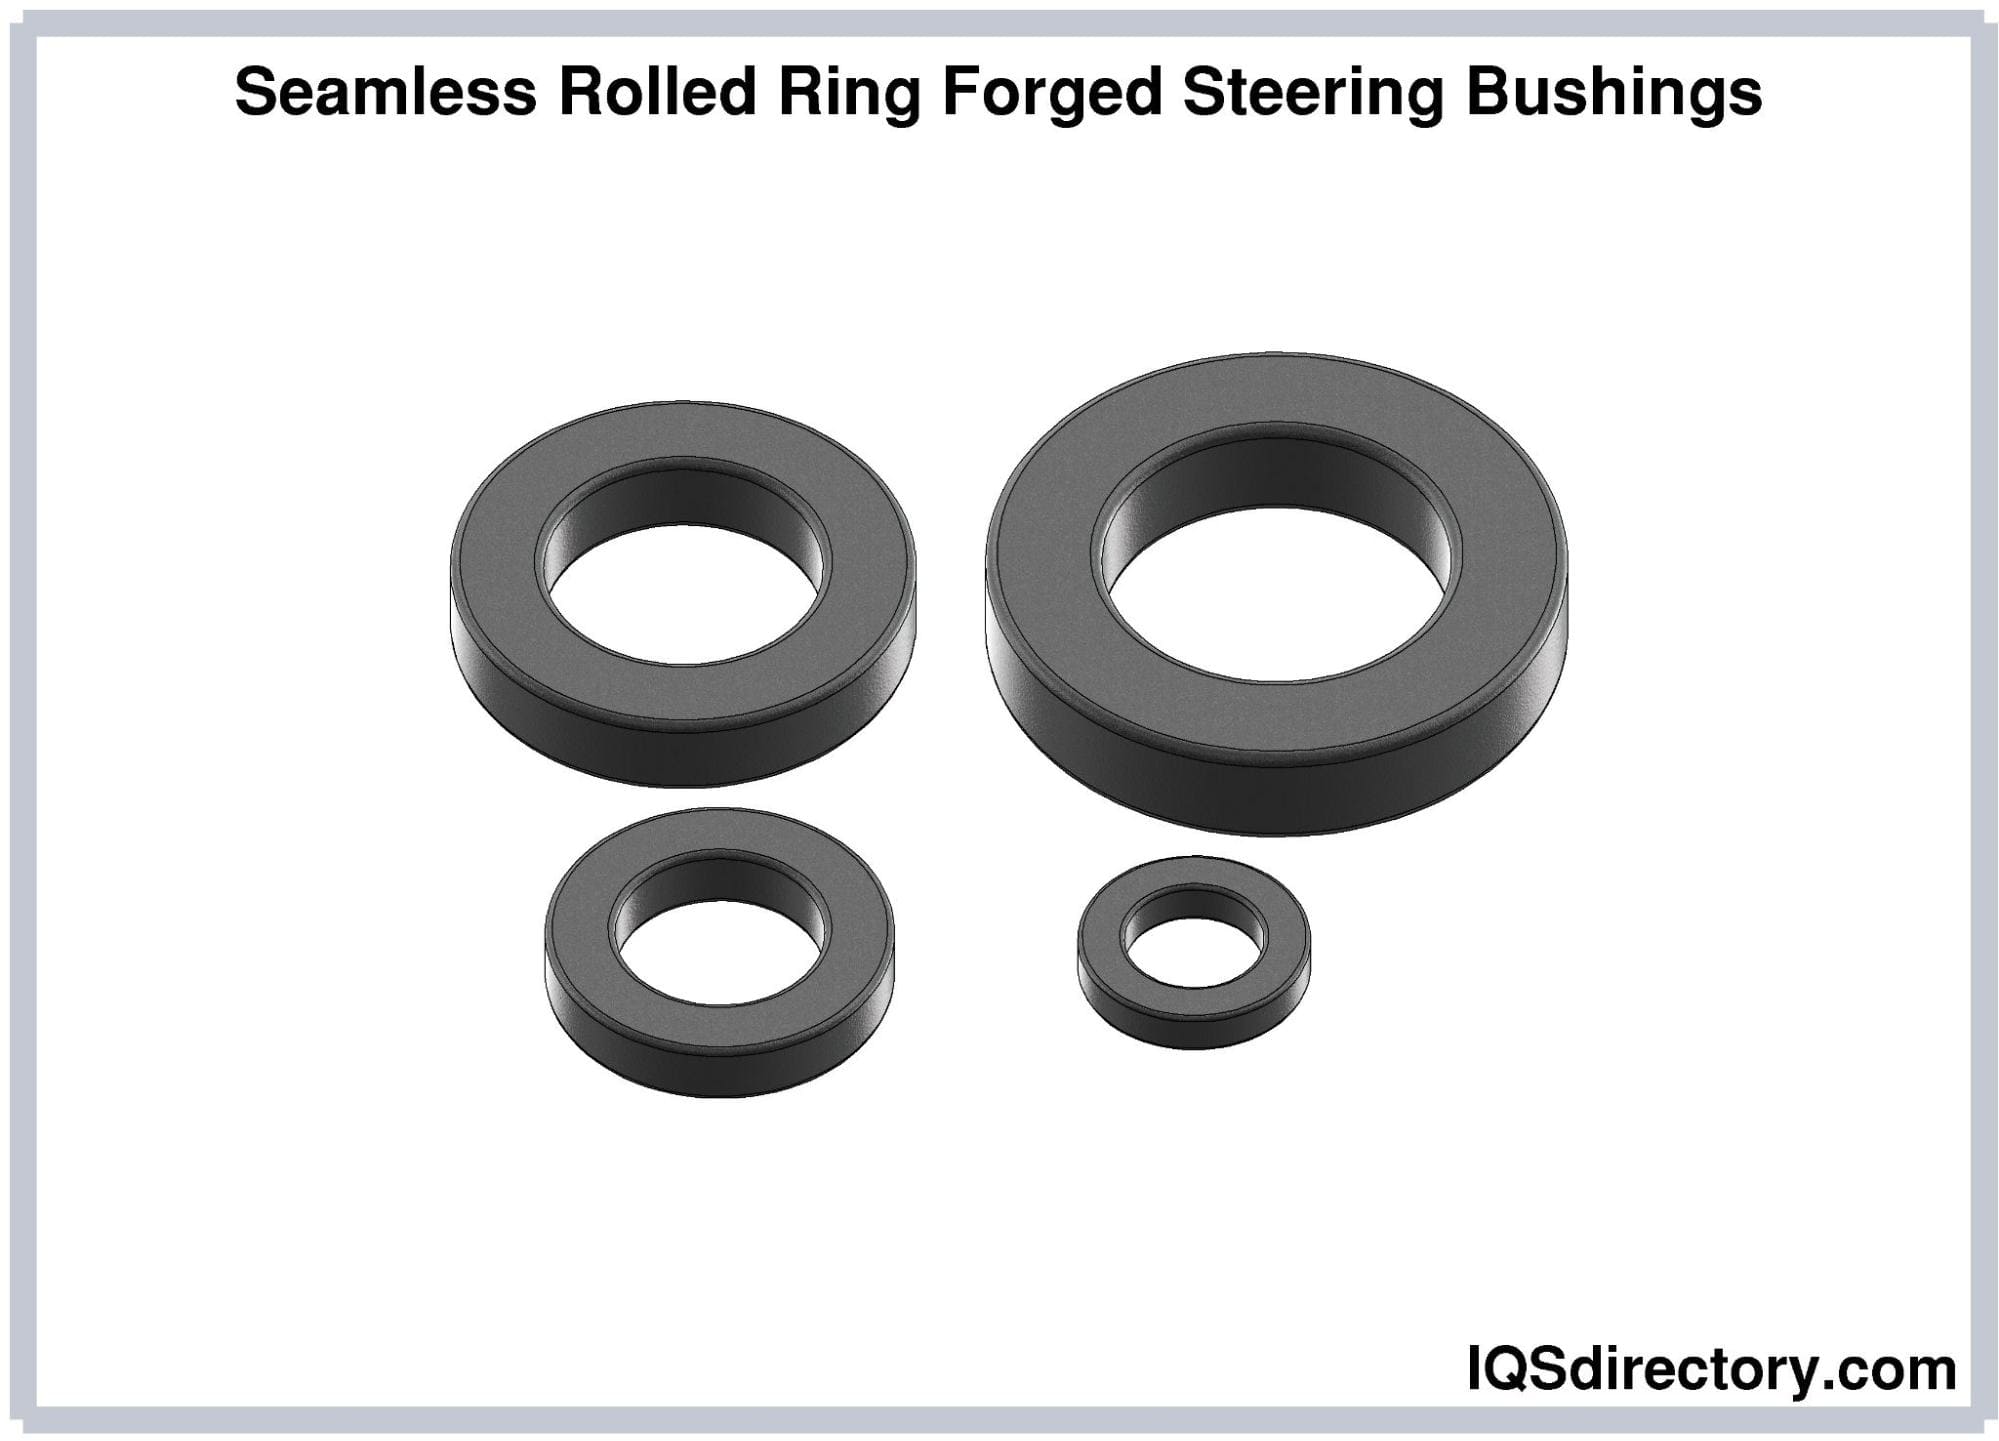 Seamless Rolled Ring Forged Steering Bushings